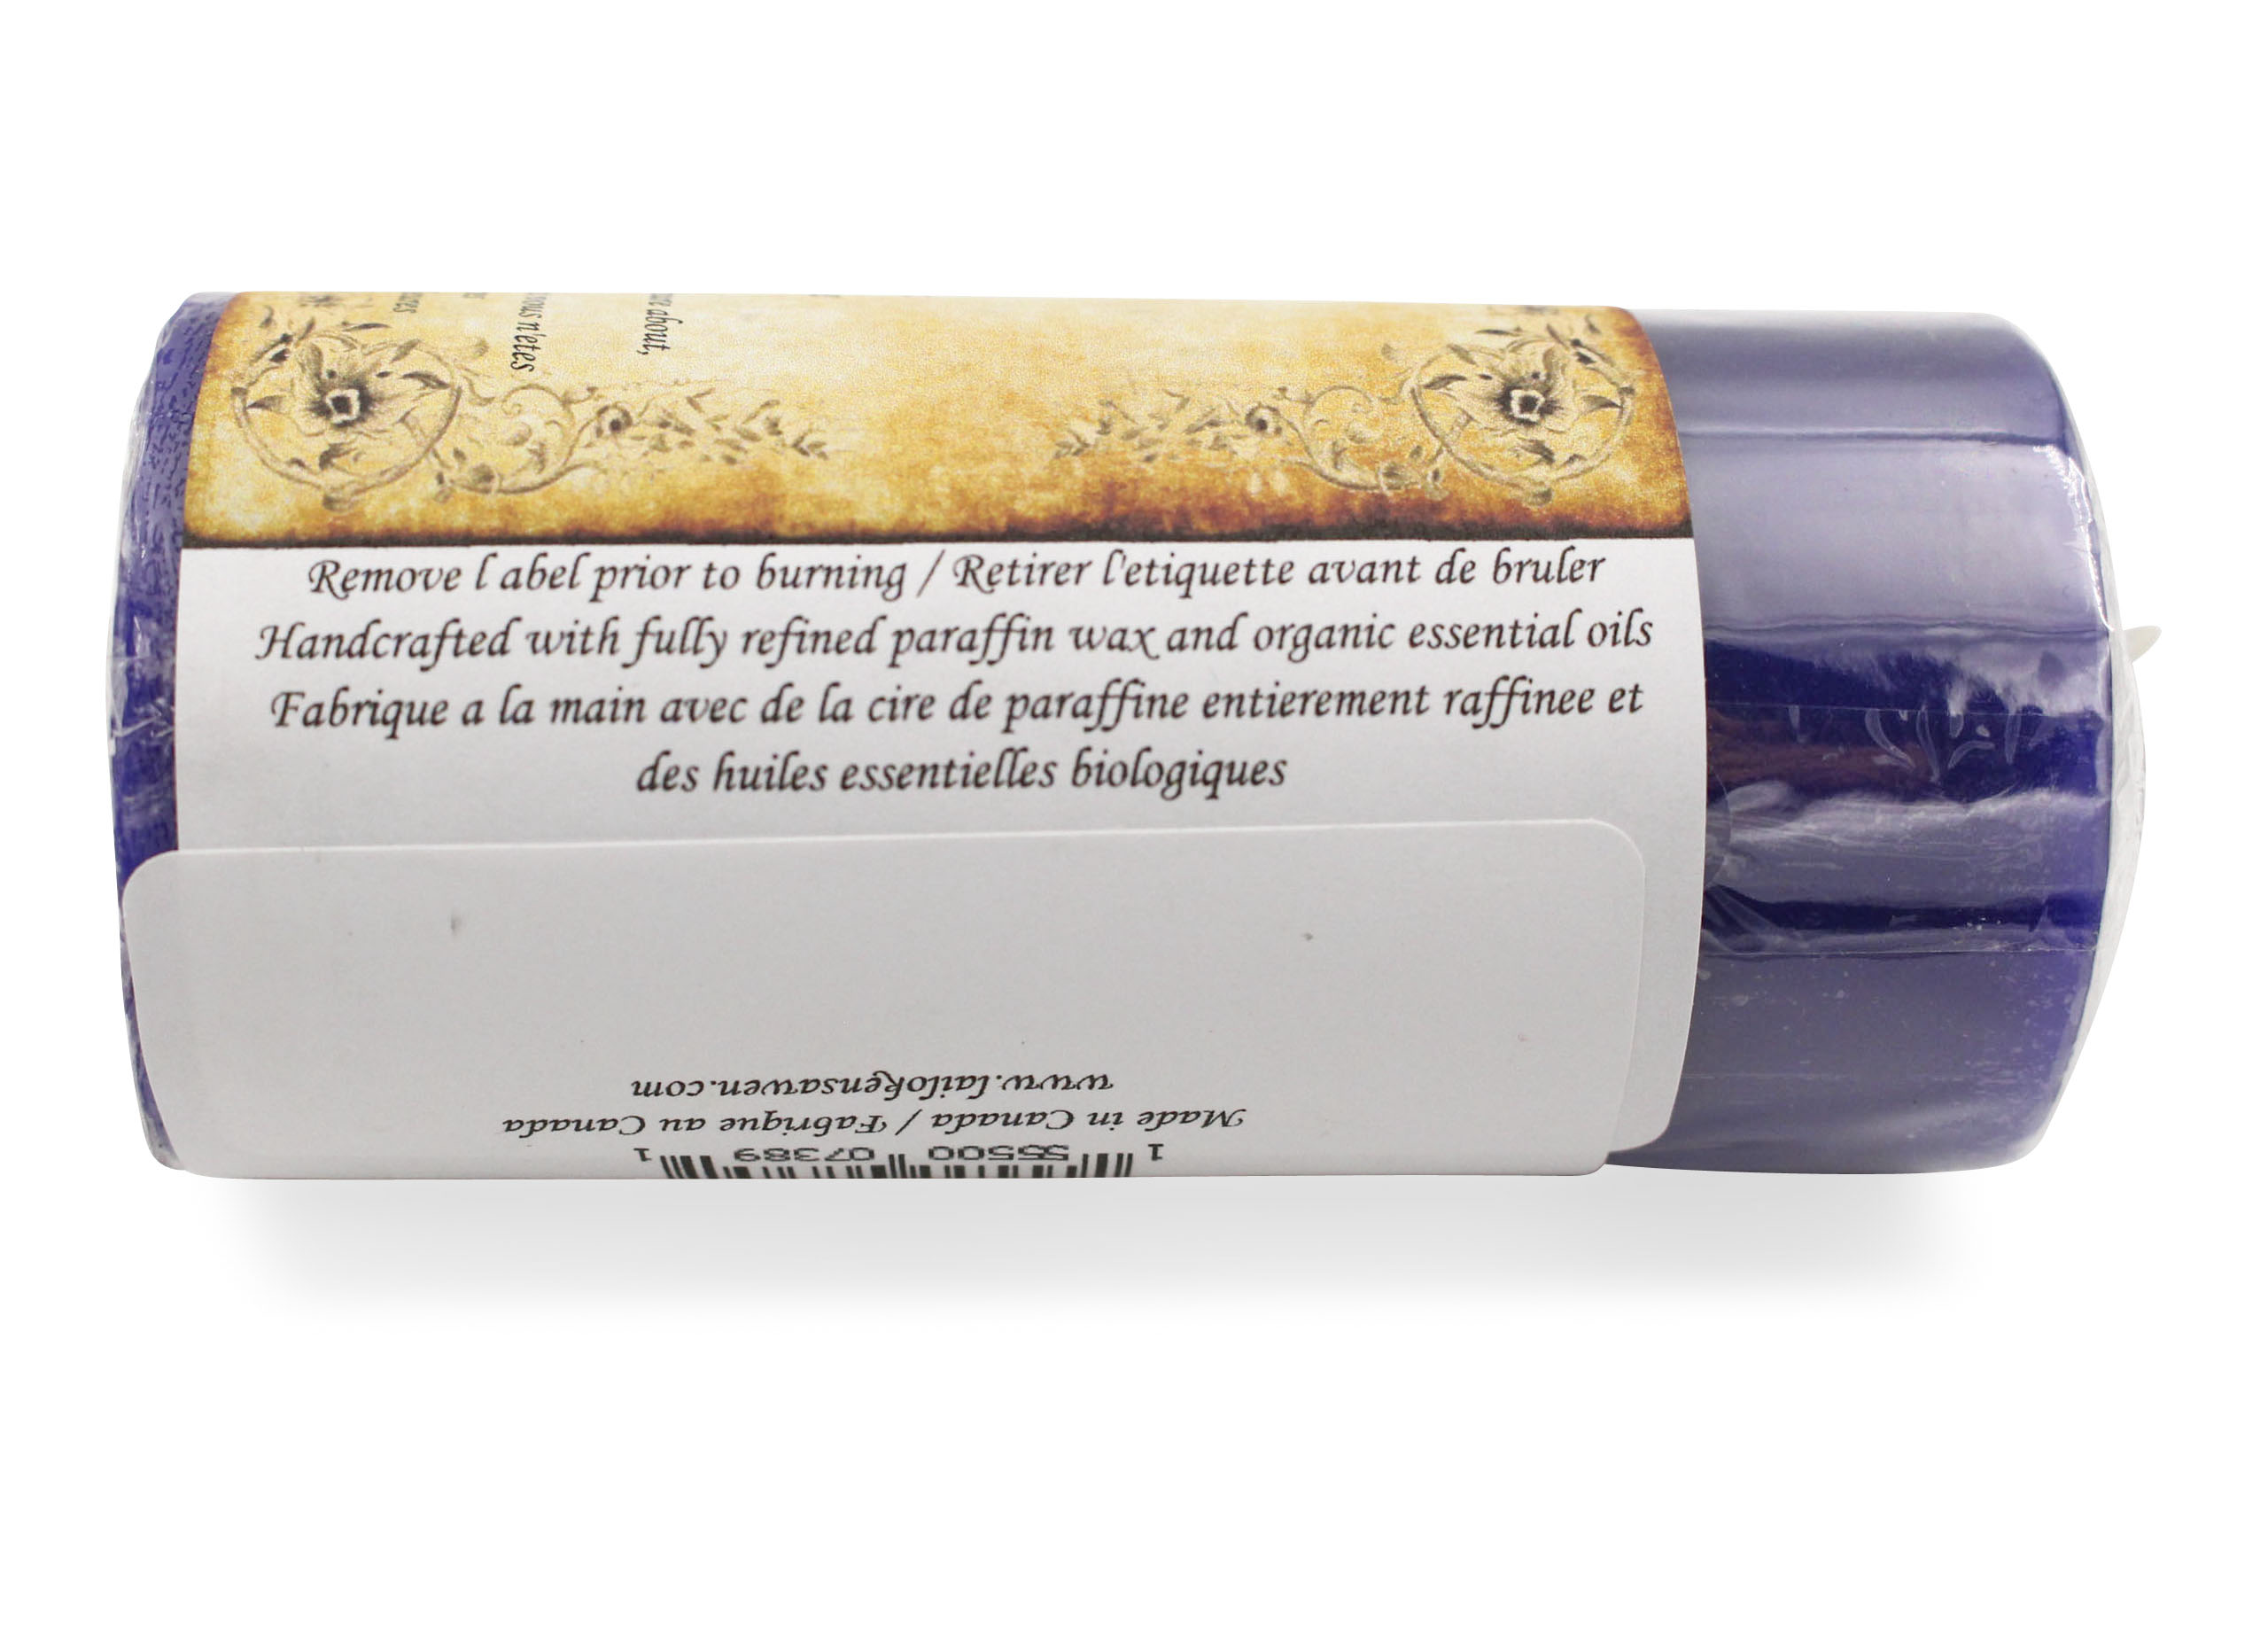 Wisdom Spell Candle - Crystal Dreams